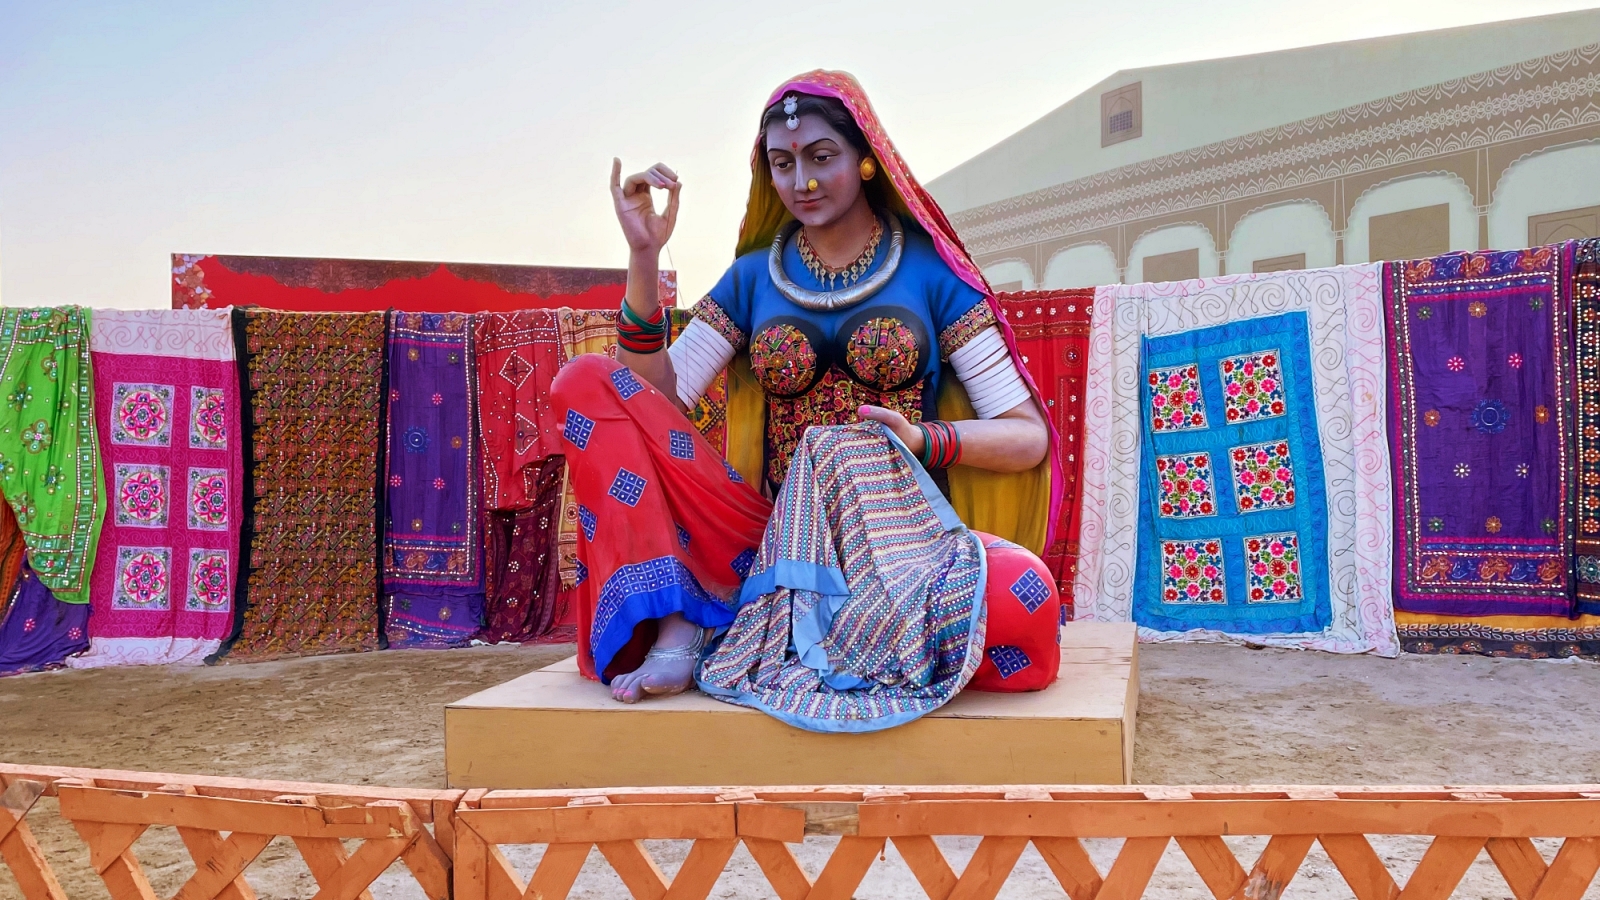 Ahmedabad to Kutch: A Glimpse of Gujarat’s Heritage